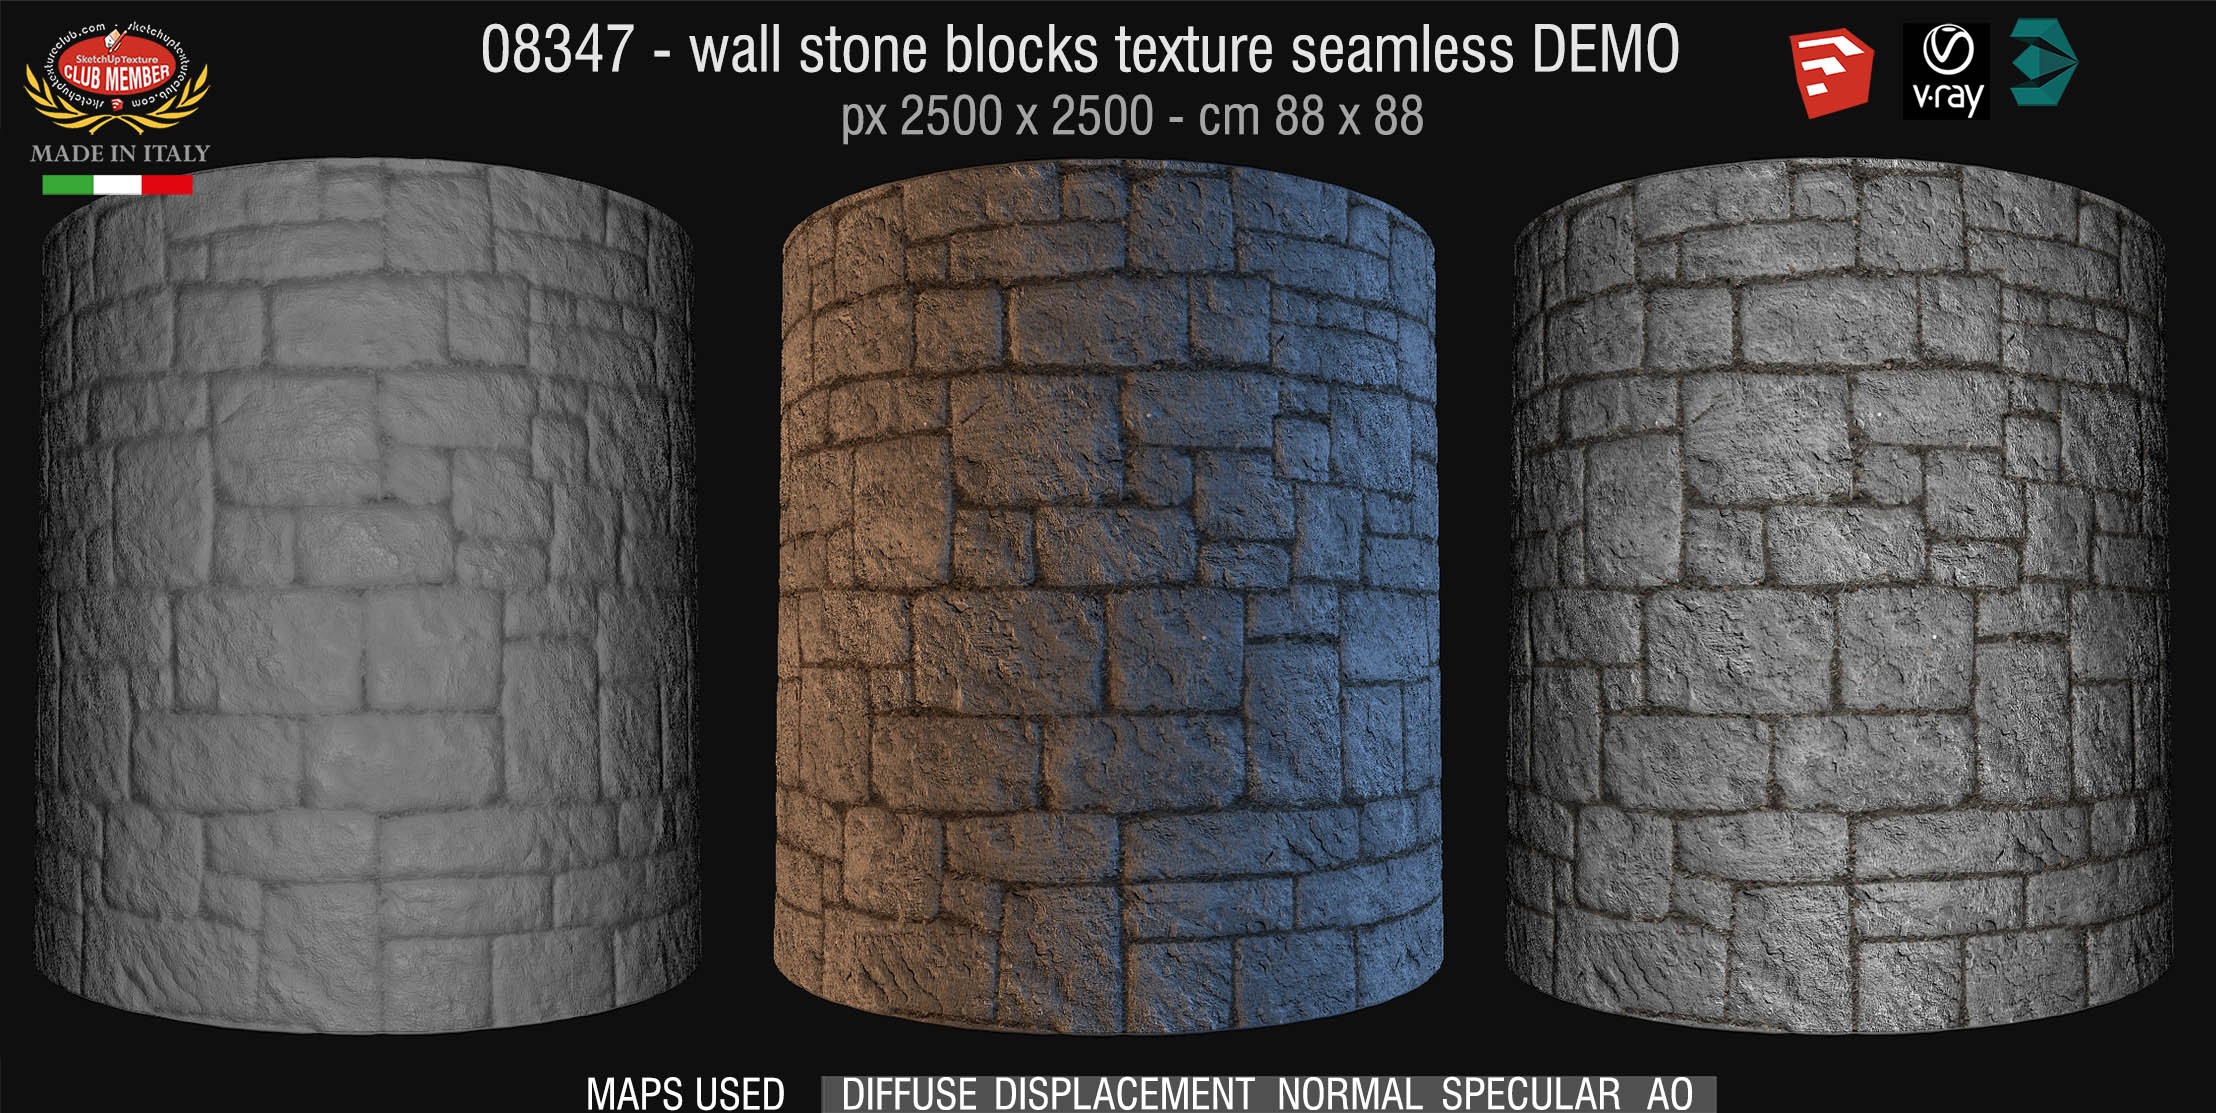 08347 HR Wall stone with regular blocks texture + maps DEMO